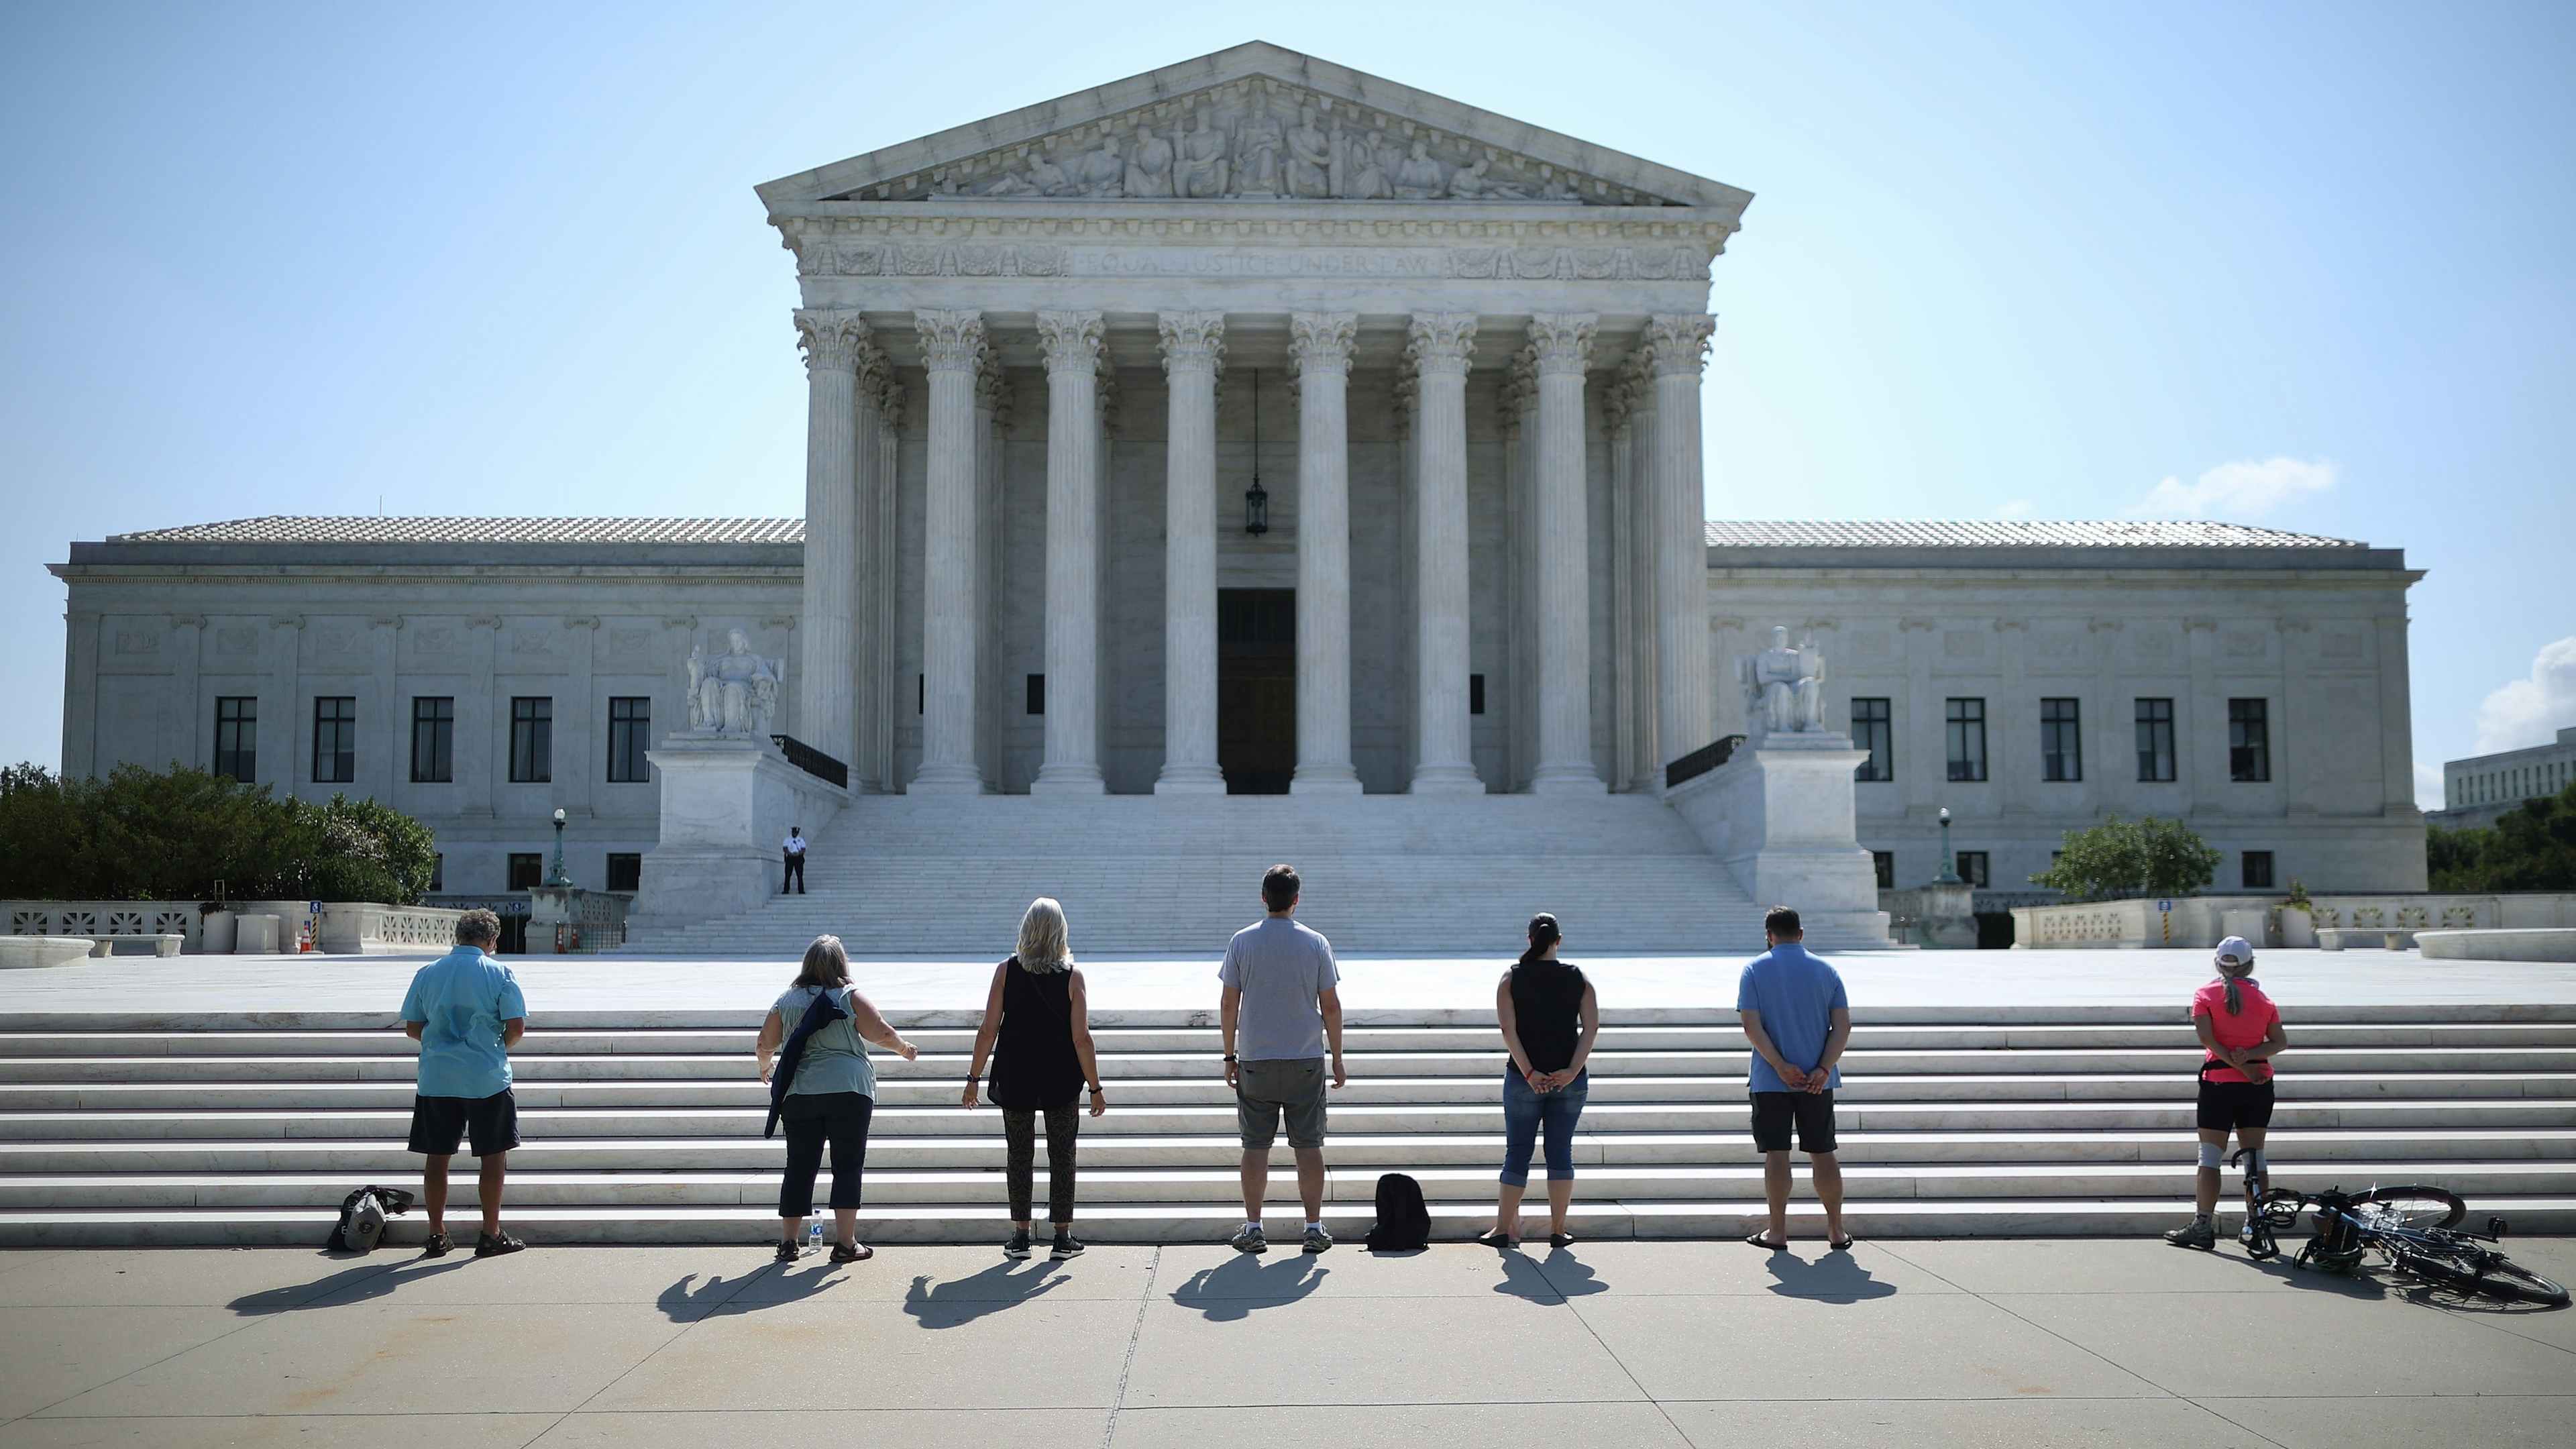 Anti-abortion demonstrators pray in front of the U.S. Supreme Court on July 08, 2020.